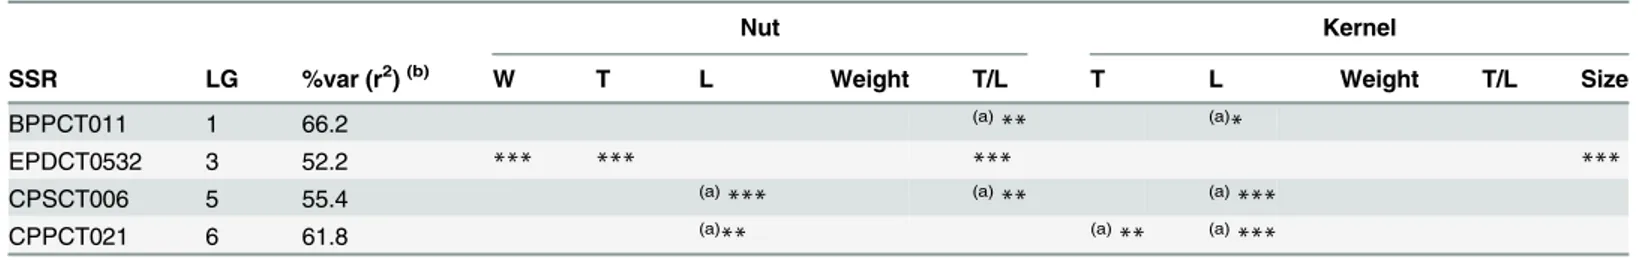 Table 5. Statistical significance of the p values and associations observed between markers and nut and kernel physical traits of almond.